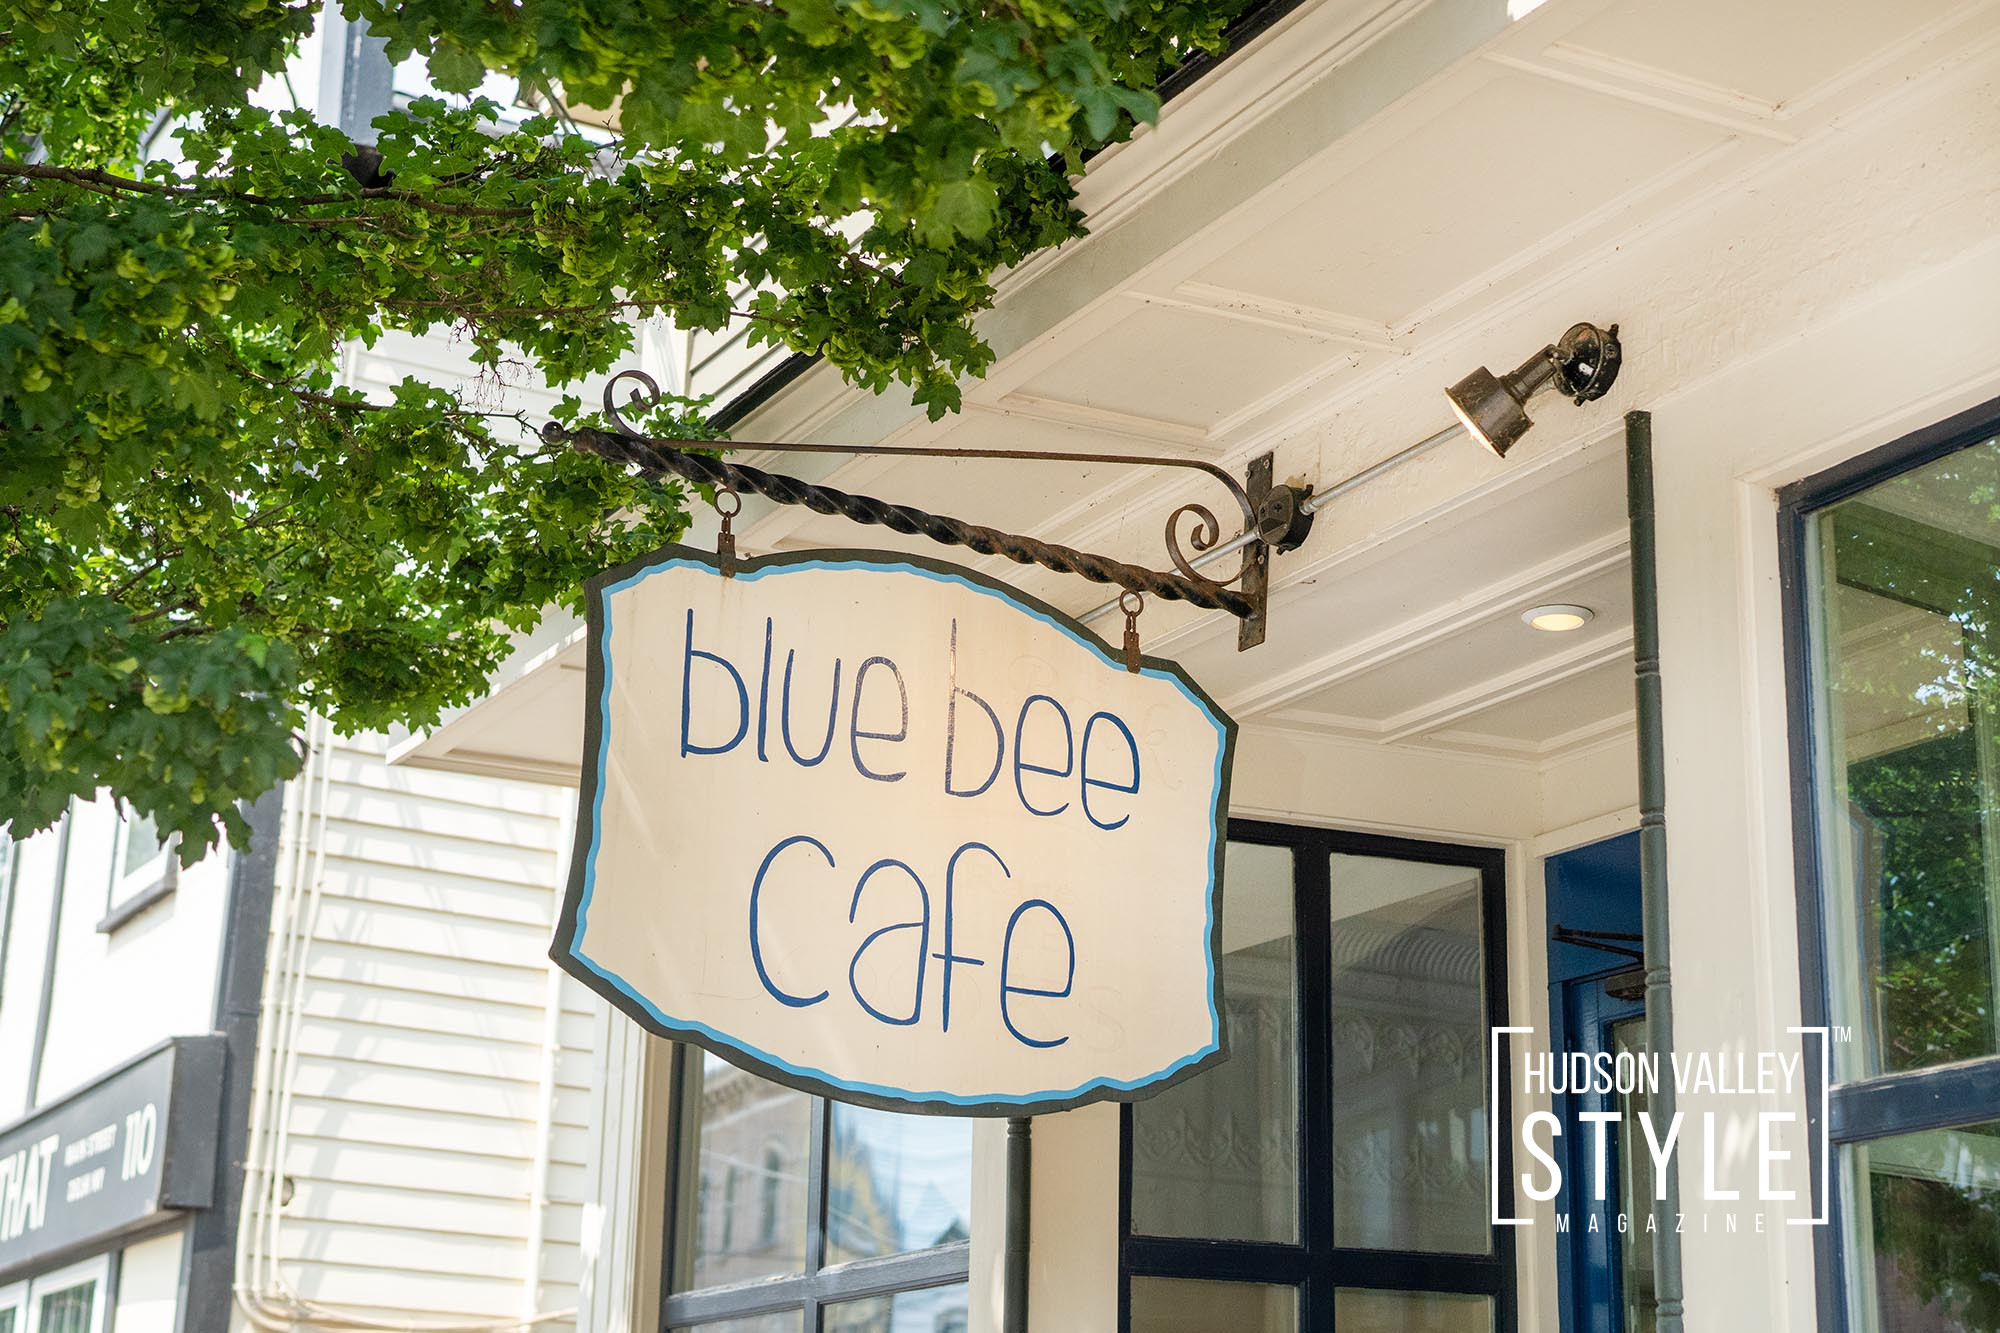 Delightful Delhi, NY: A Gourmet Journey at Blue Bee Cafe – Restaurant Reviews with Photographer Maxwell Alexander – Presented by Alluvion Vacations